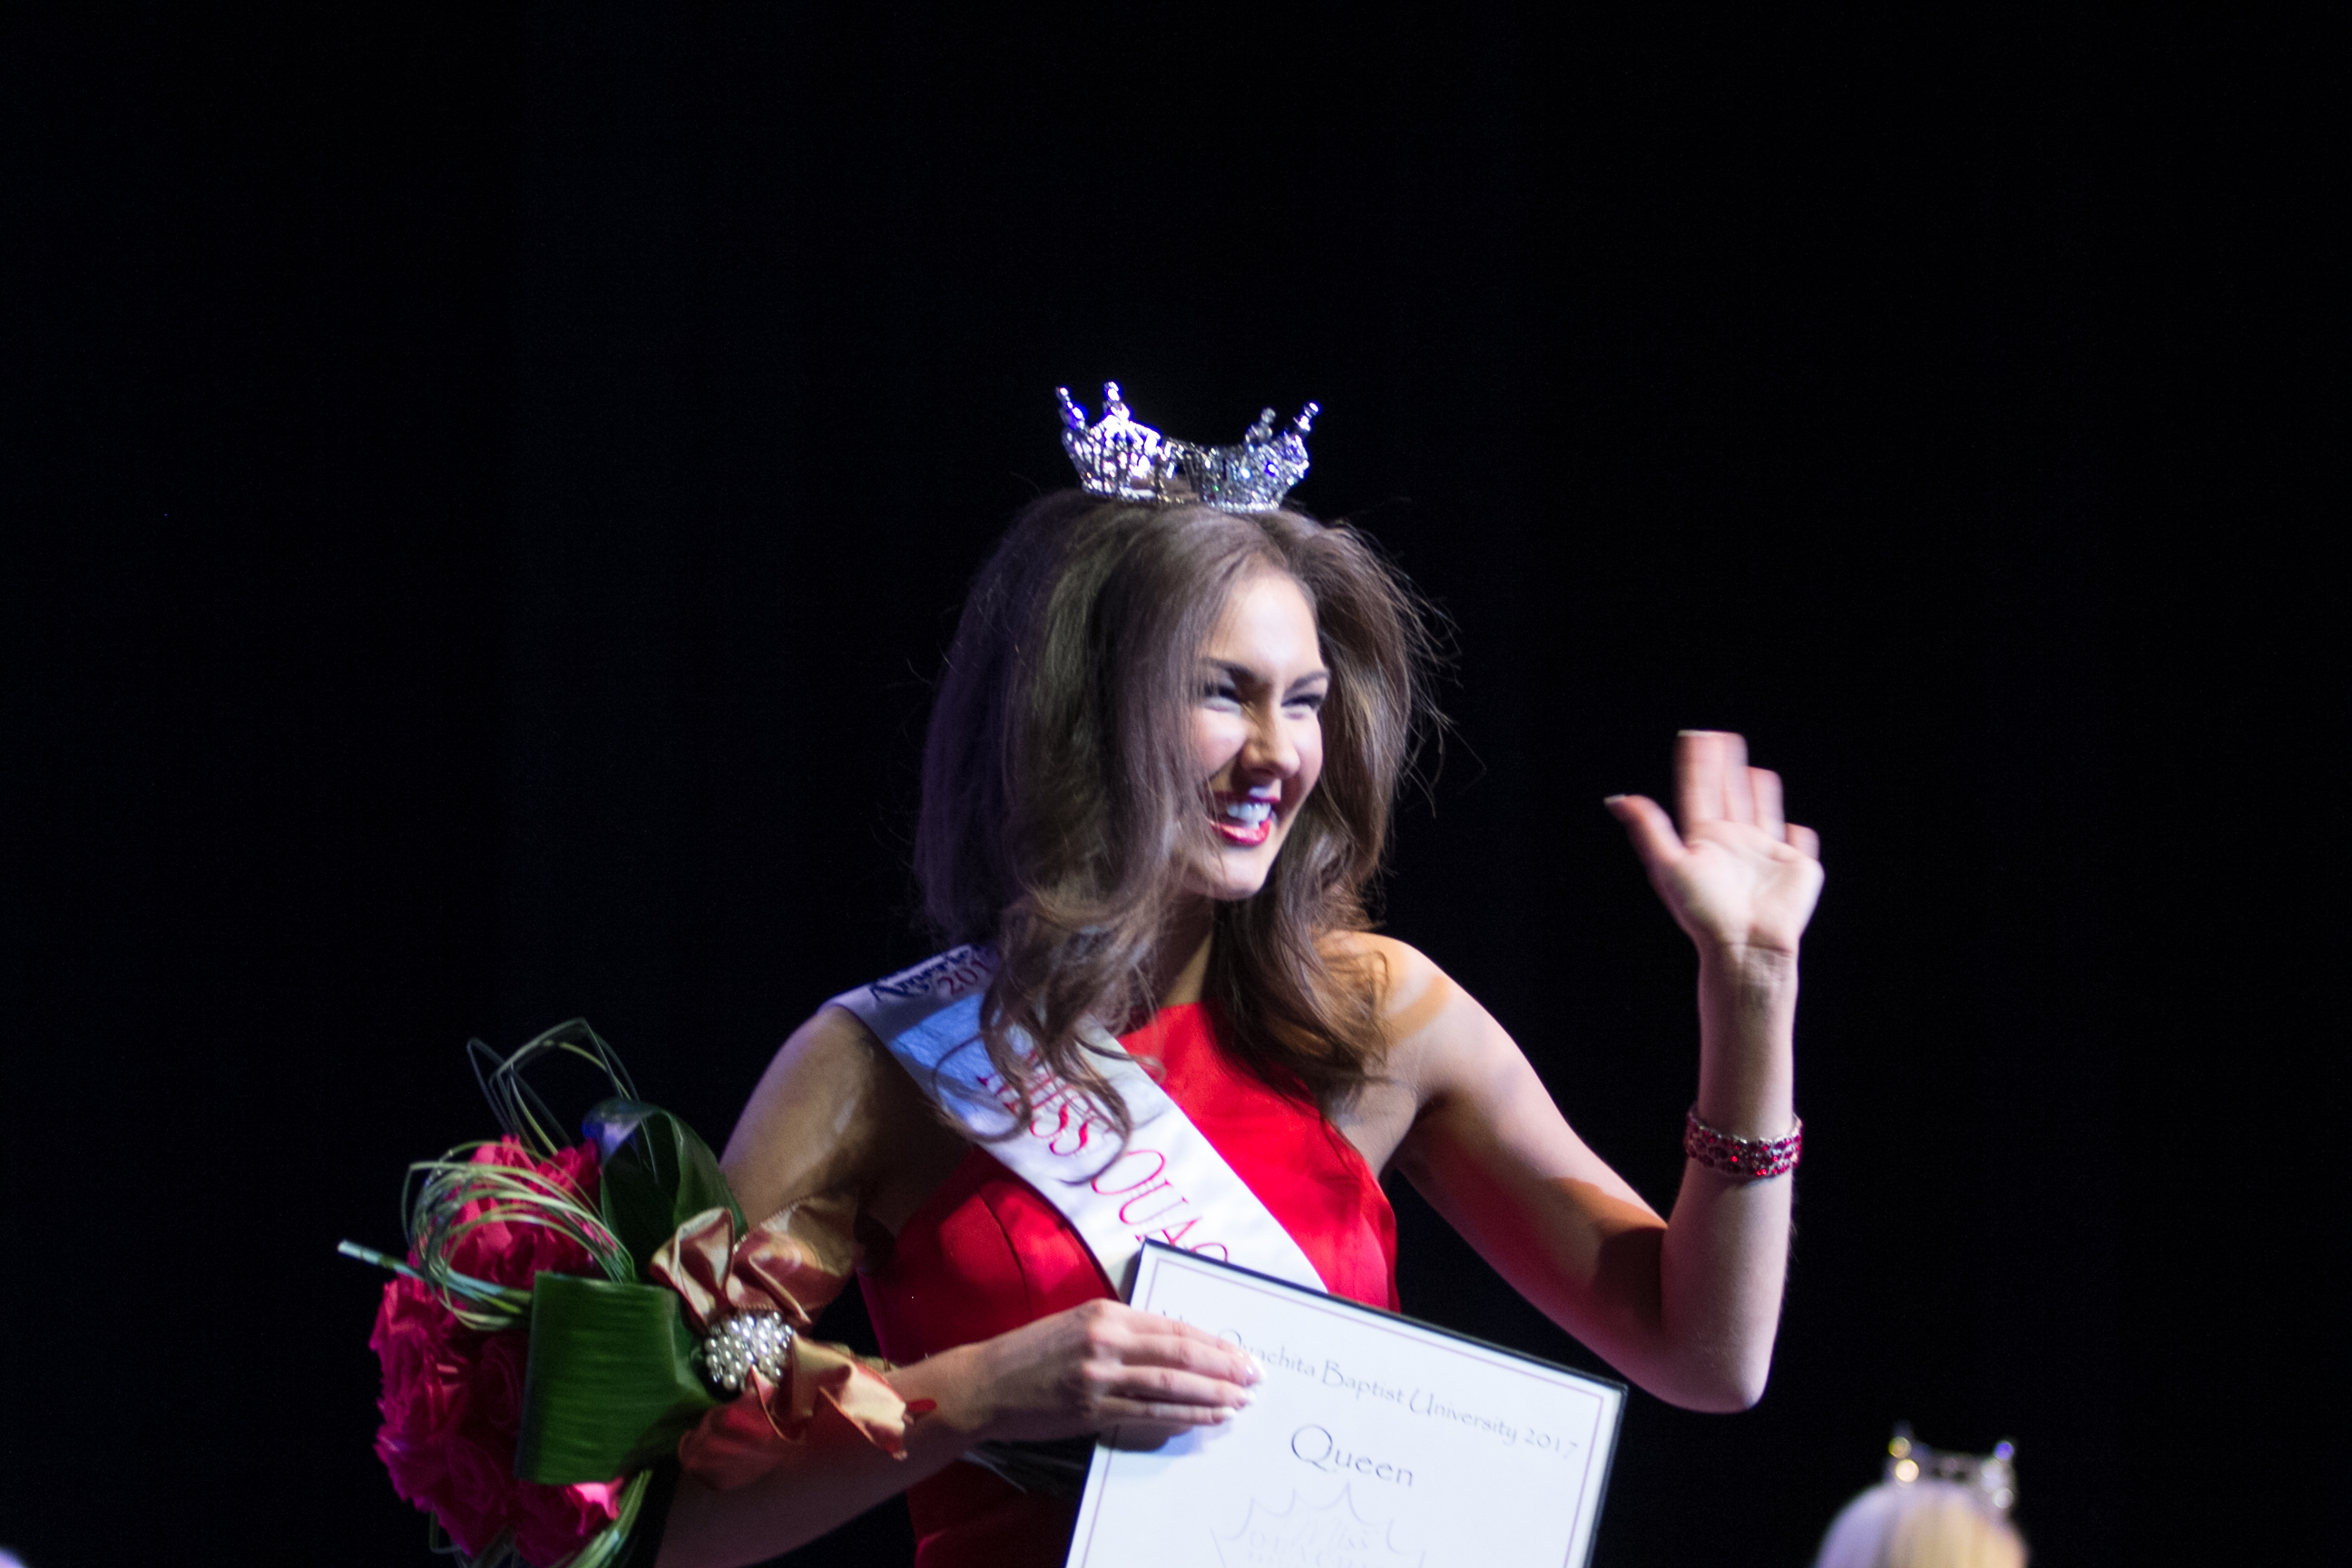 Tiffany Lee crowned Miss OBU 2017 at 50th anniversary pageant.